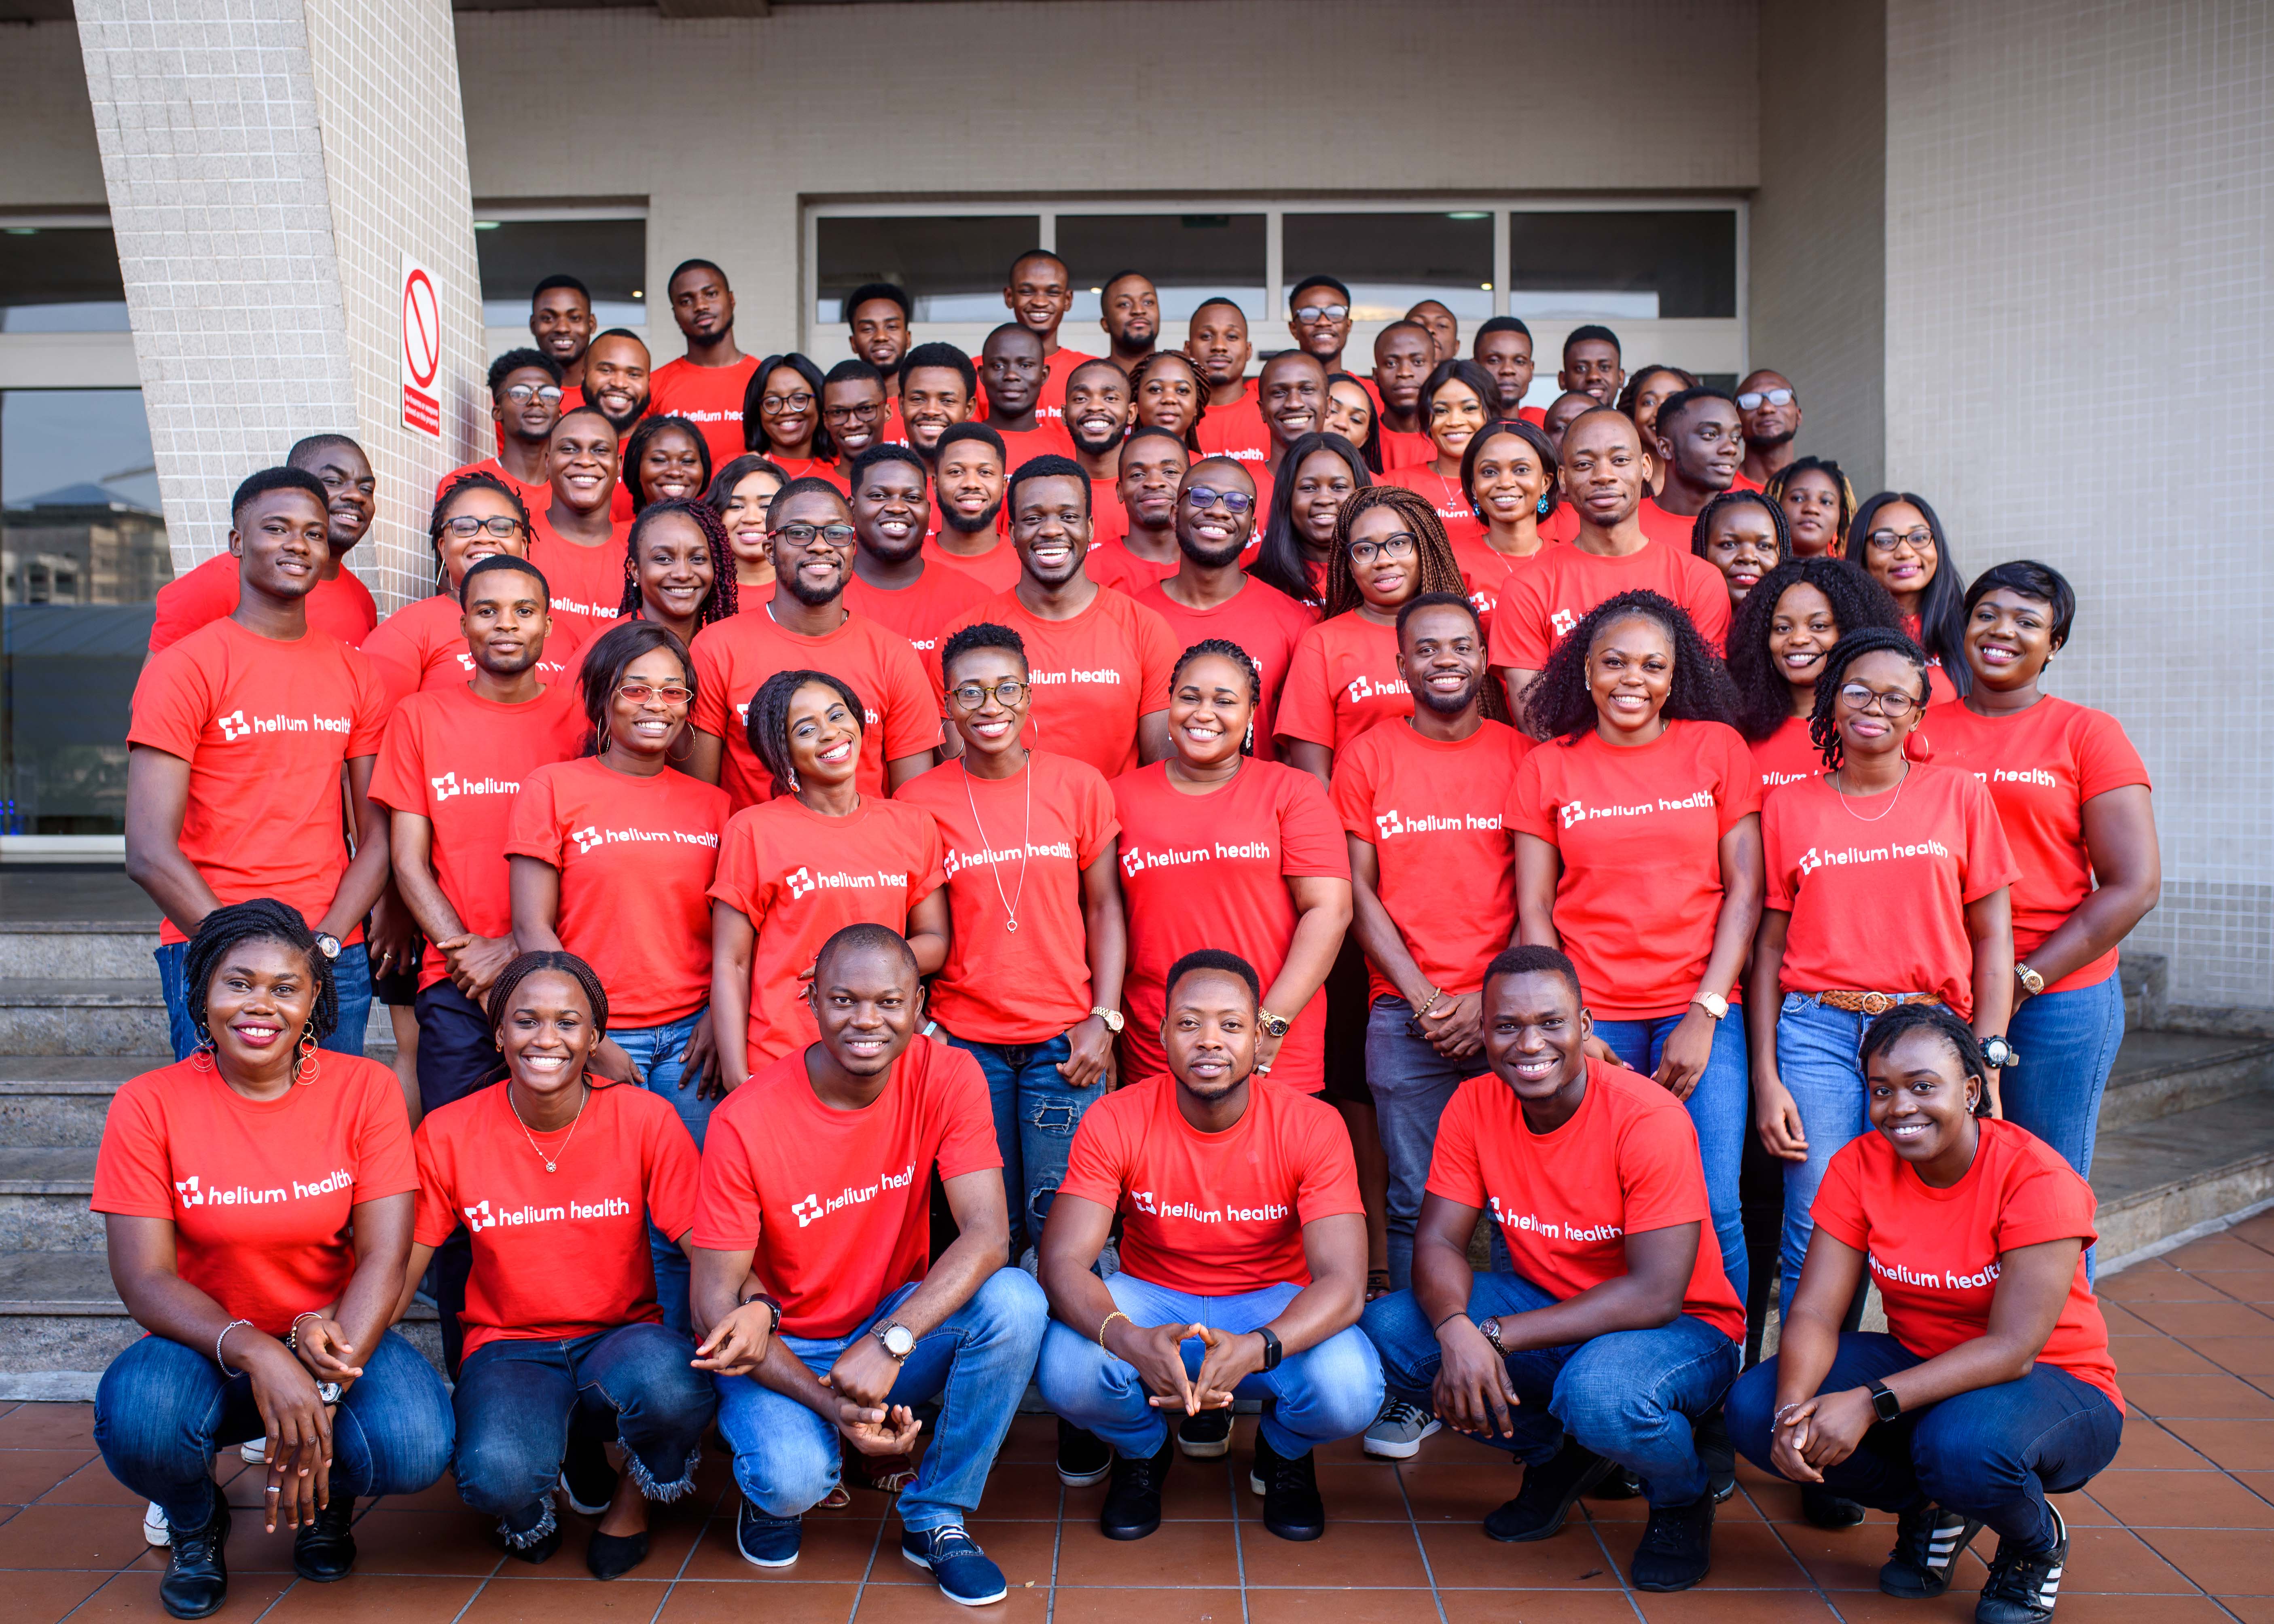 Helium Health team wearing red company t-shirts and blue jeans